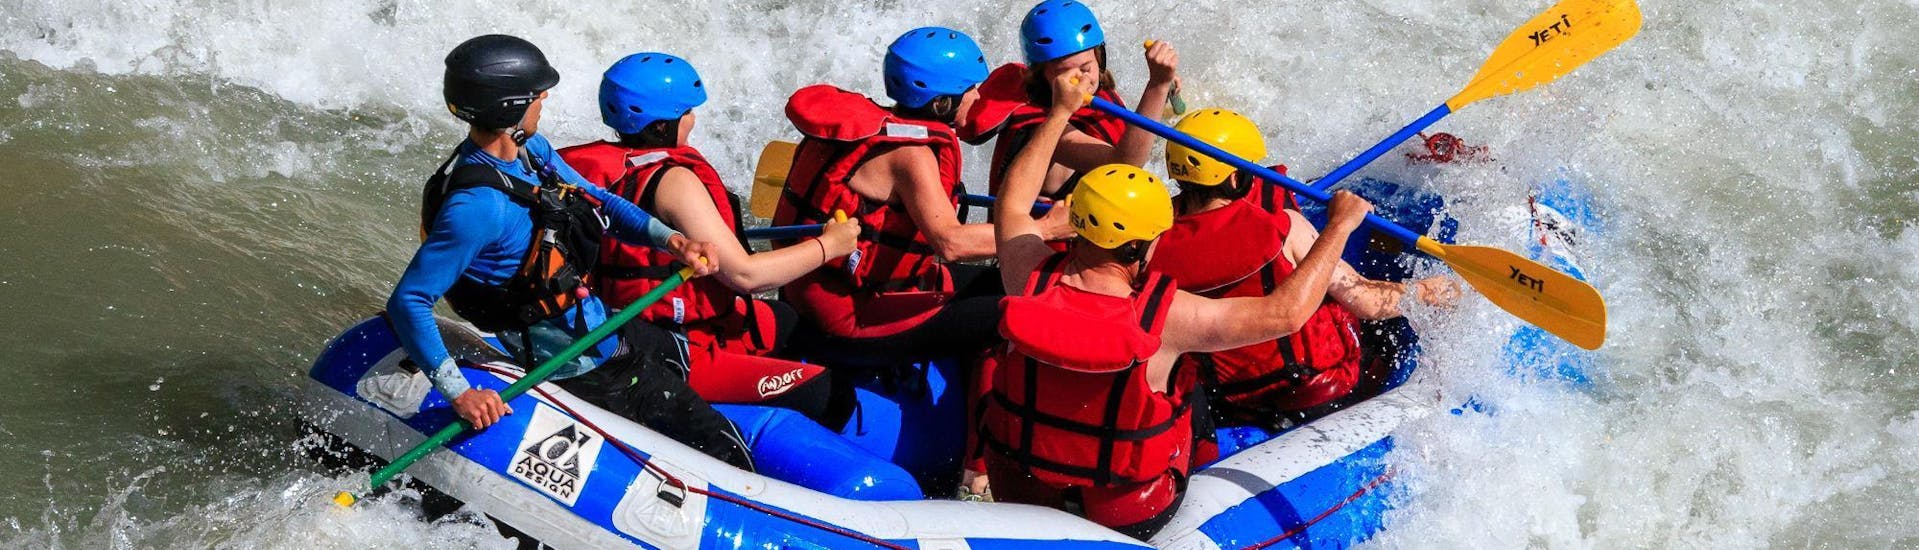 A group of adults and kids are caught in rapids on the Verdon river and are having fun during the Classic rafting descent organized by Yeti Rafting.